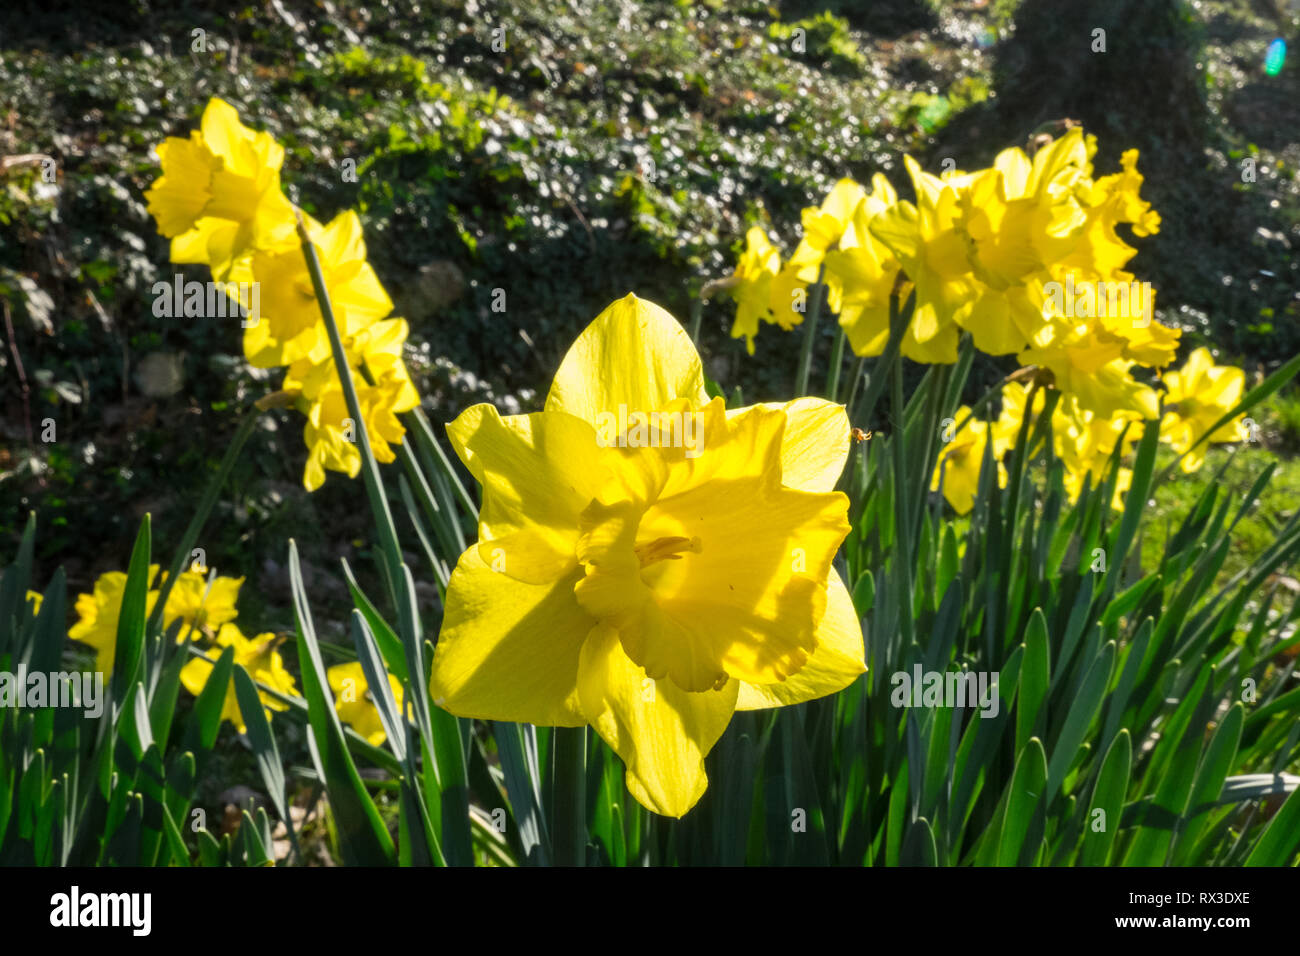 Daffodils,daffodil,in,bloom,blooming,national,flower,of,Wales,in,bloom,UK Weather: 20 degrees in this area of Ceredigion,Mid Wales,Welsh,landscape, Stock Photo